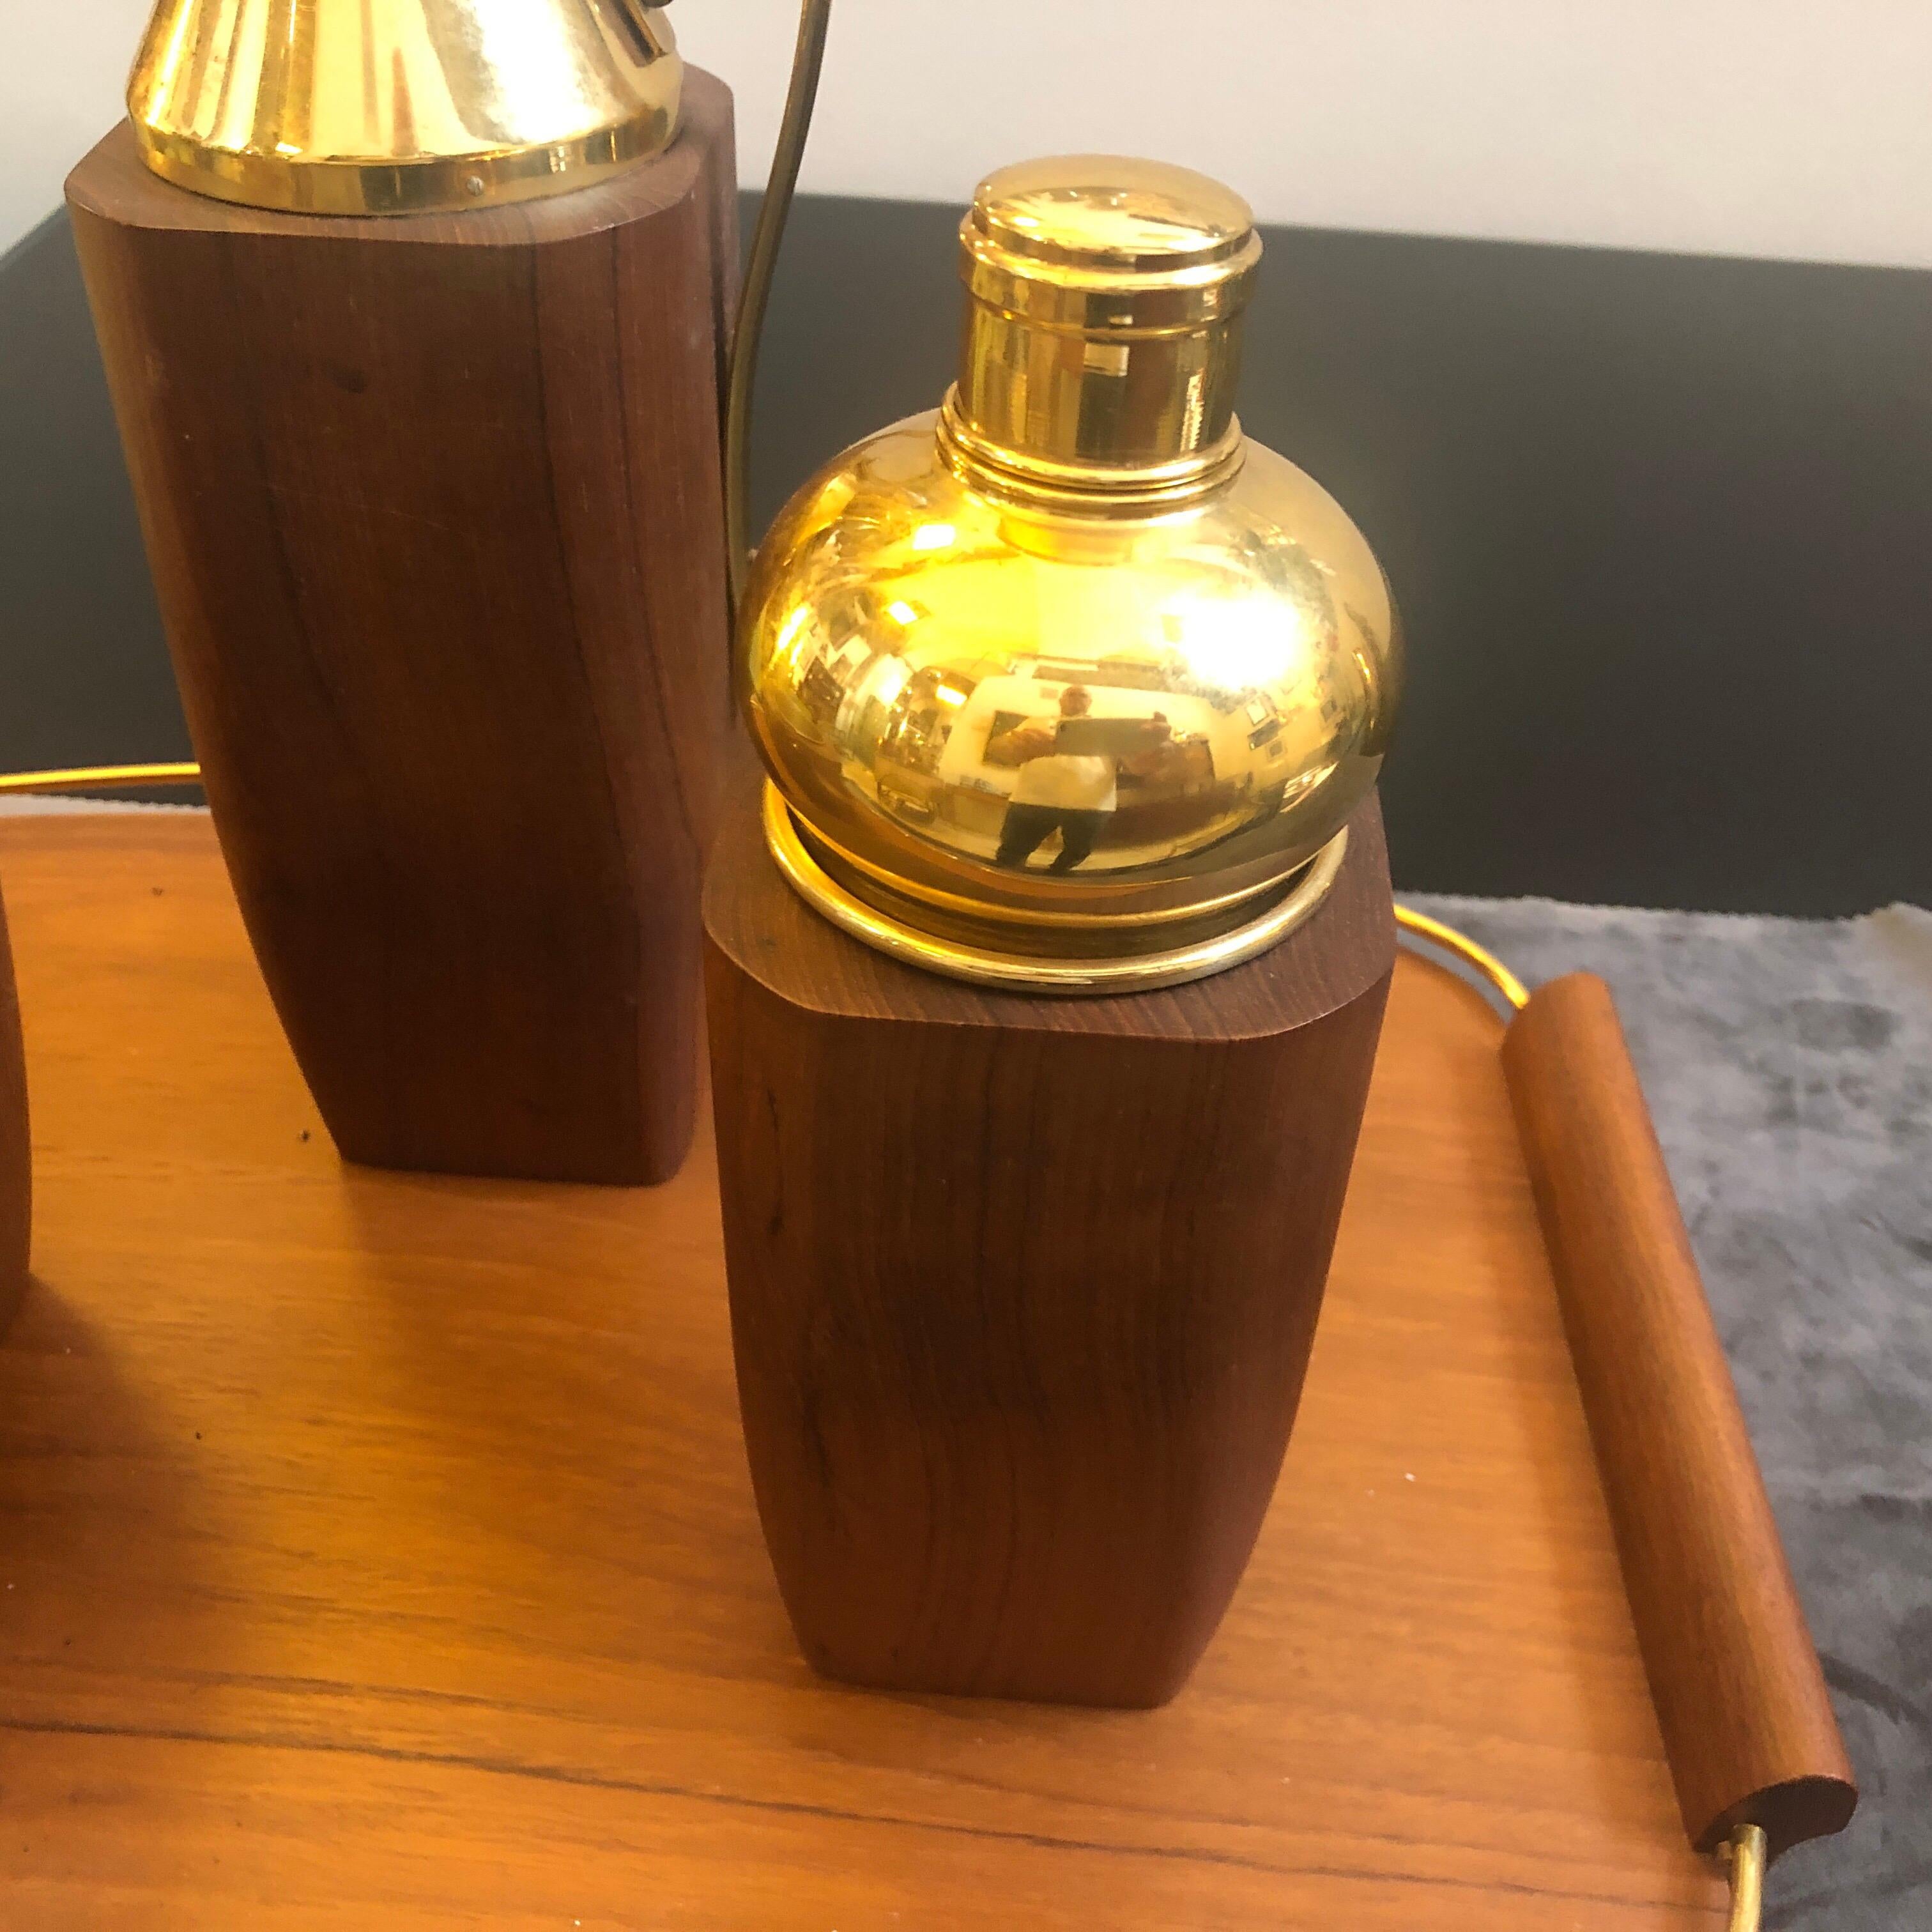 A never used wood and brass Italian cocktail set by Aldo Tura, made in Italy in the 1960s.